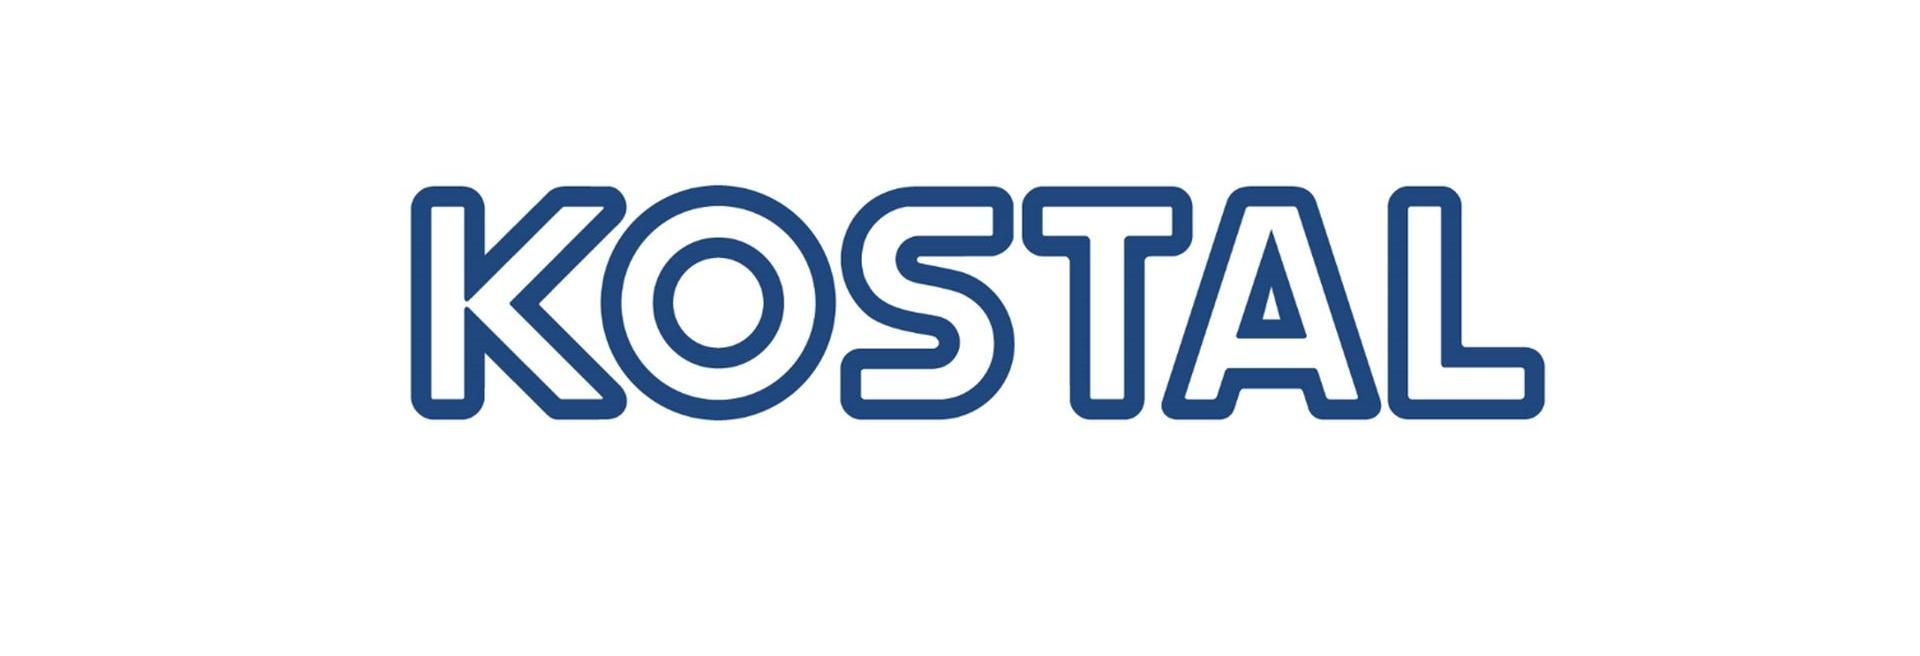 KOSTAL Chooses Budapest As The Location For Its First Global Multifunctional BSC - VIDEO REPORT